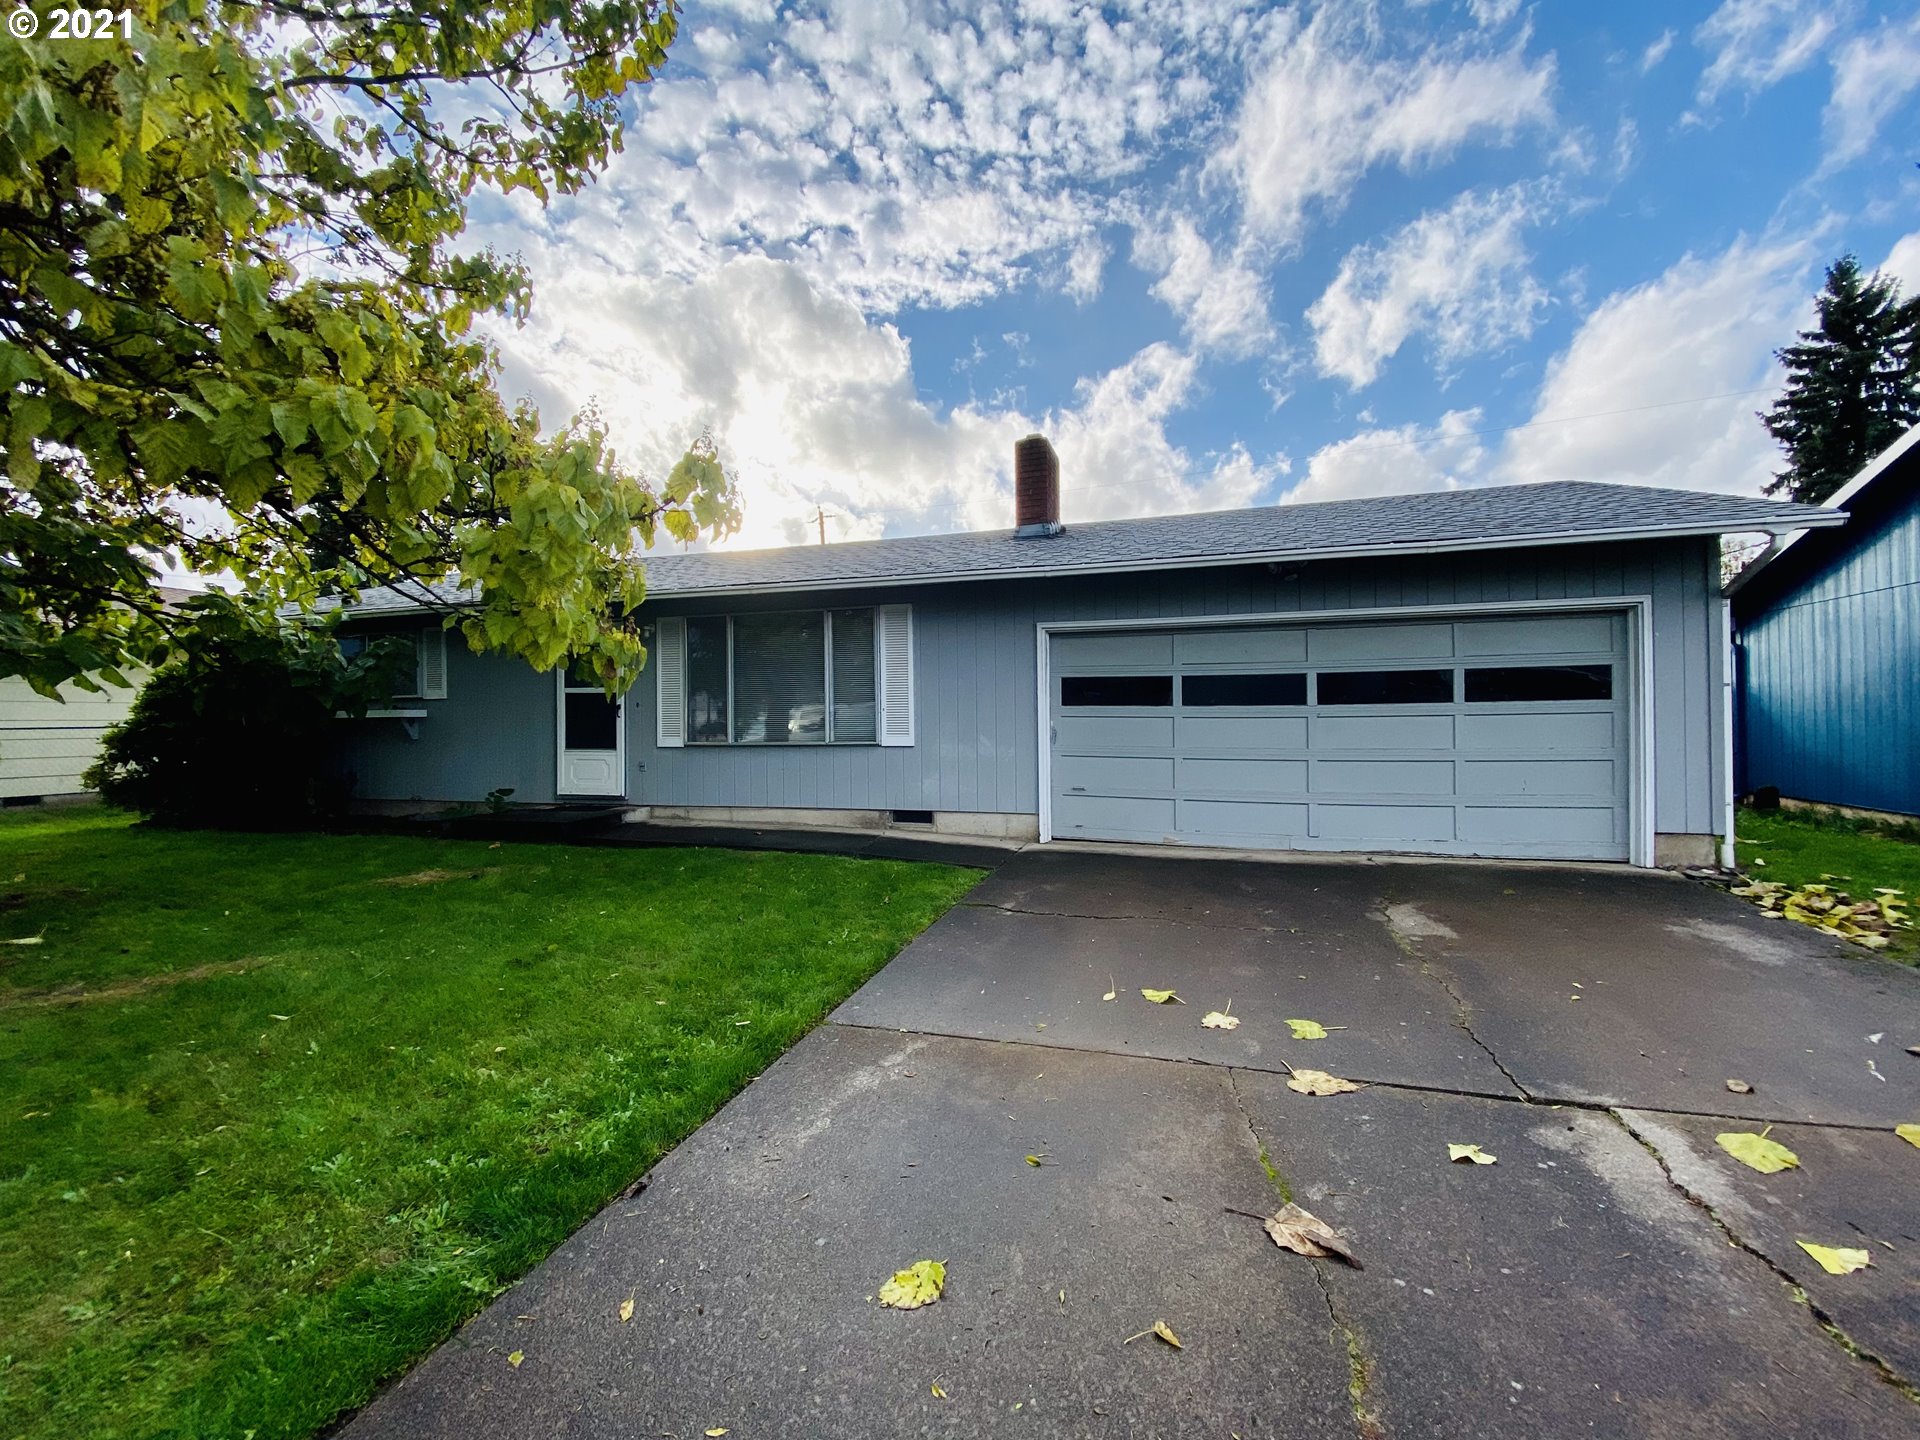 464 S 39TH PL (1 of 18)